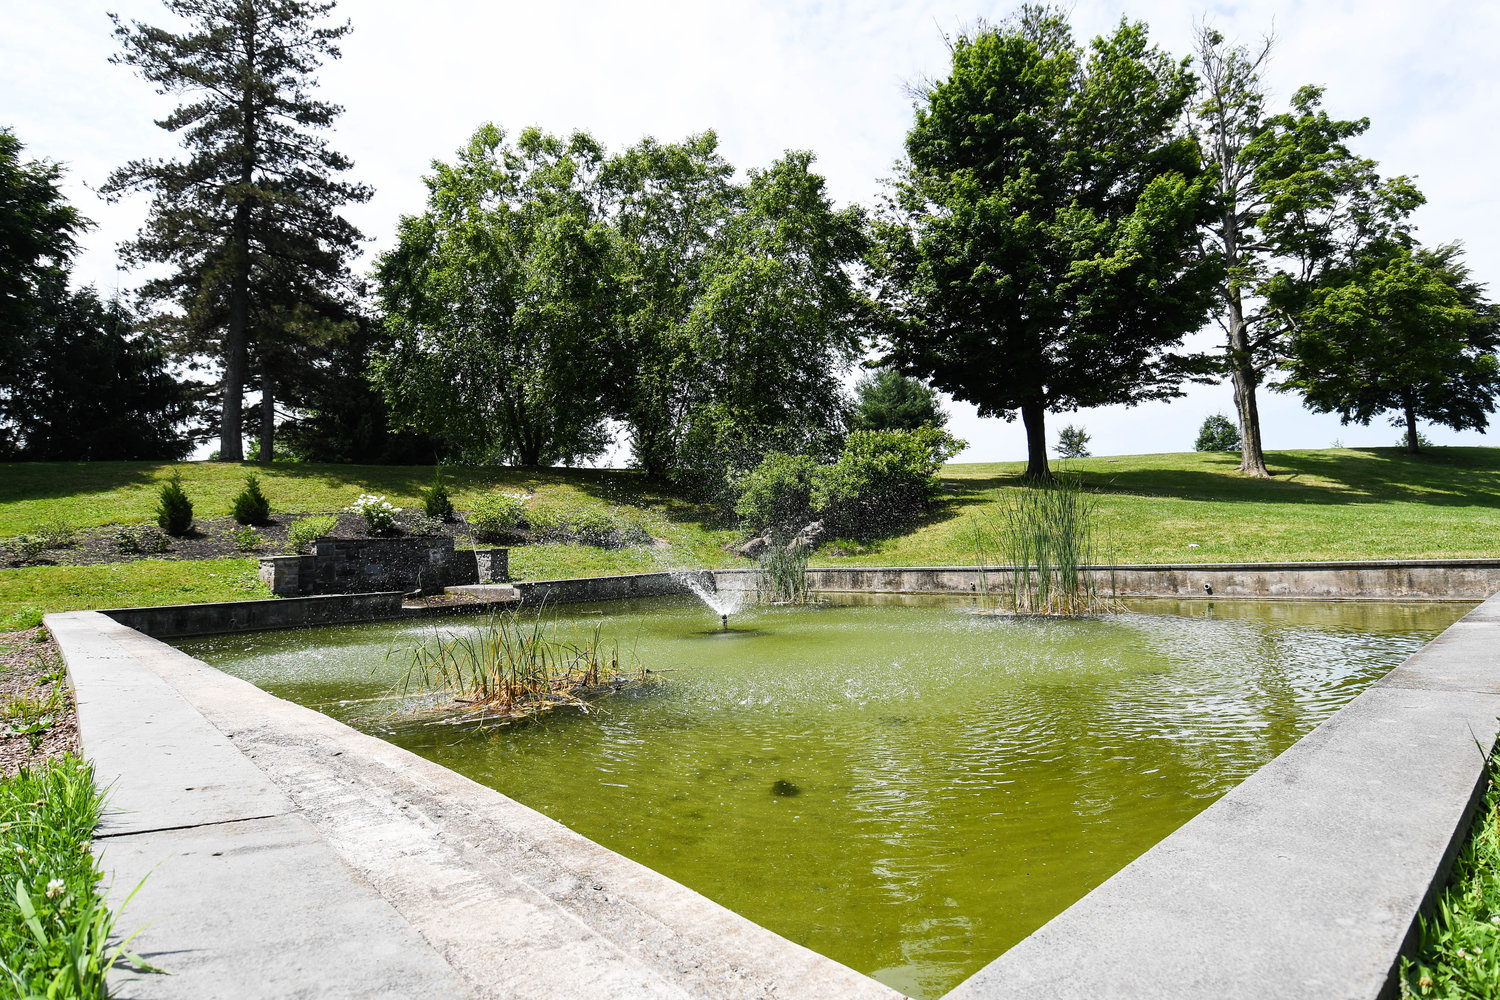 One of the signature features of Frederick T. Proctor Park, the Lily Pond, is shown in this photo from July.